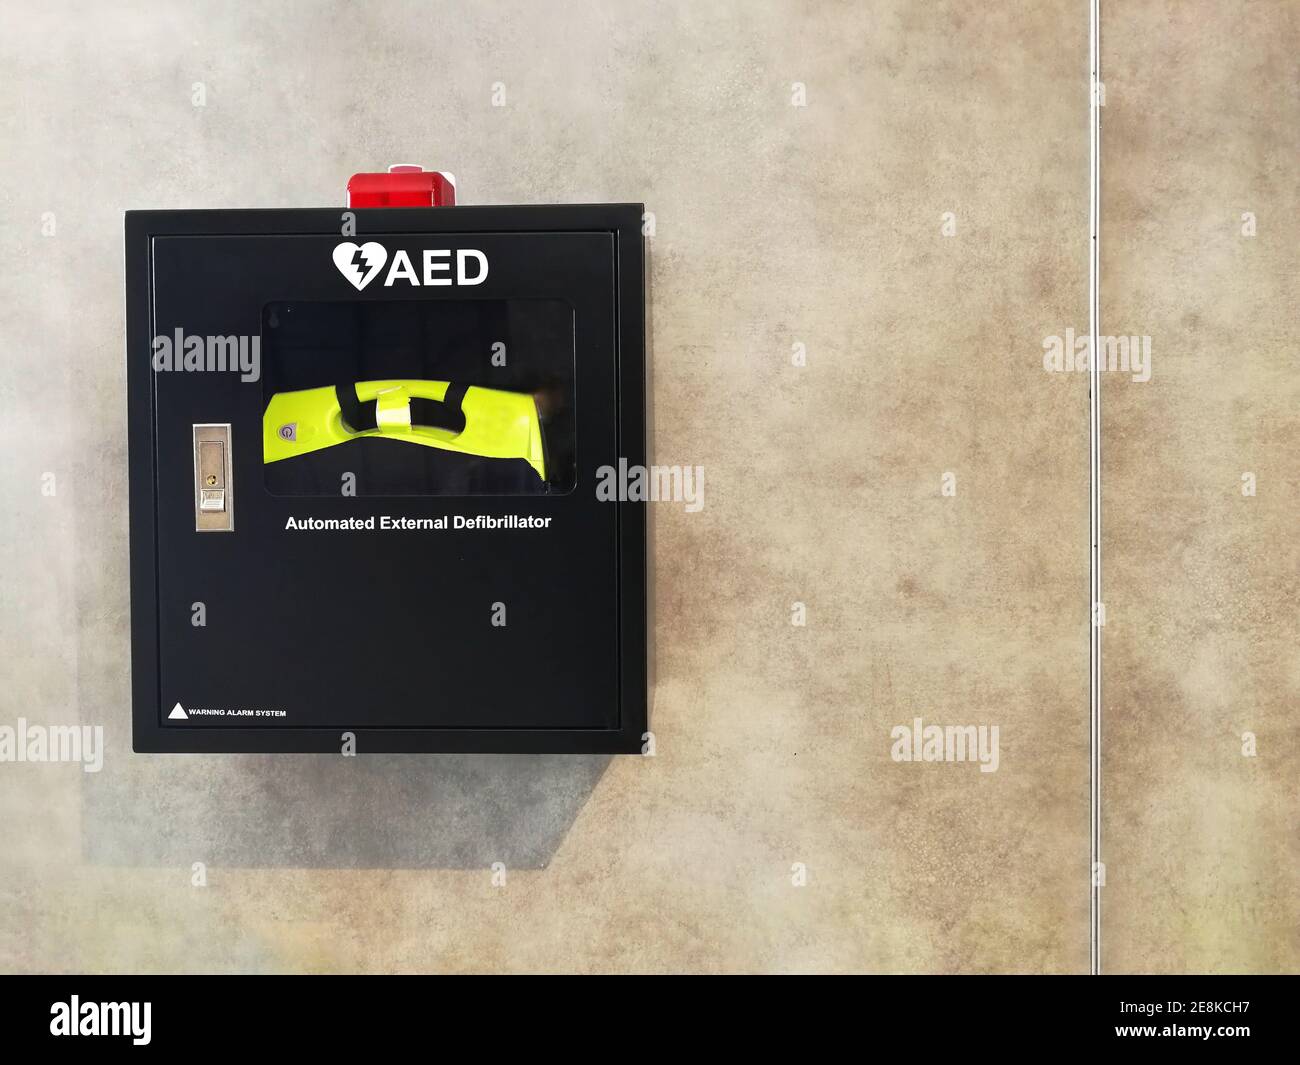 Automated External Defibrillator, AED black box with Red LED Alarm on on bare cement or concrete wall Stock Photo